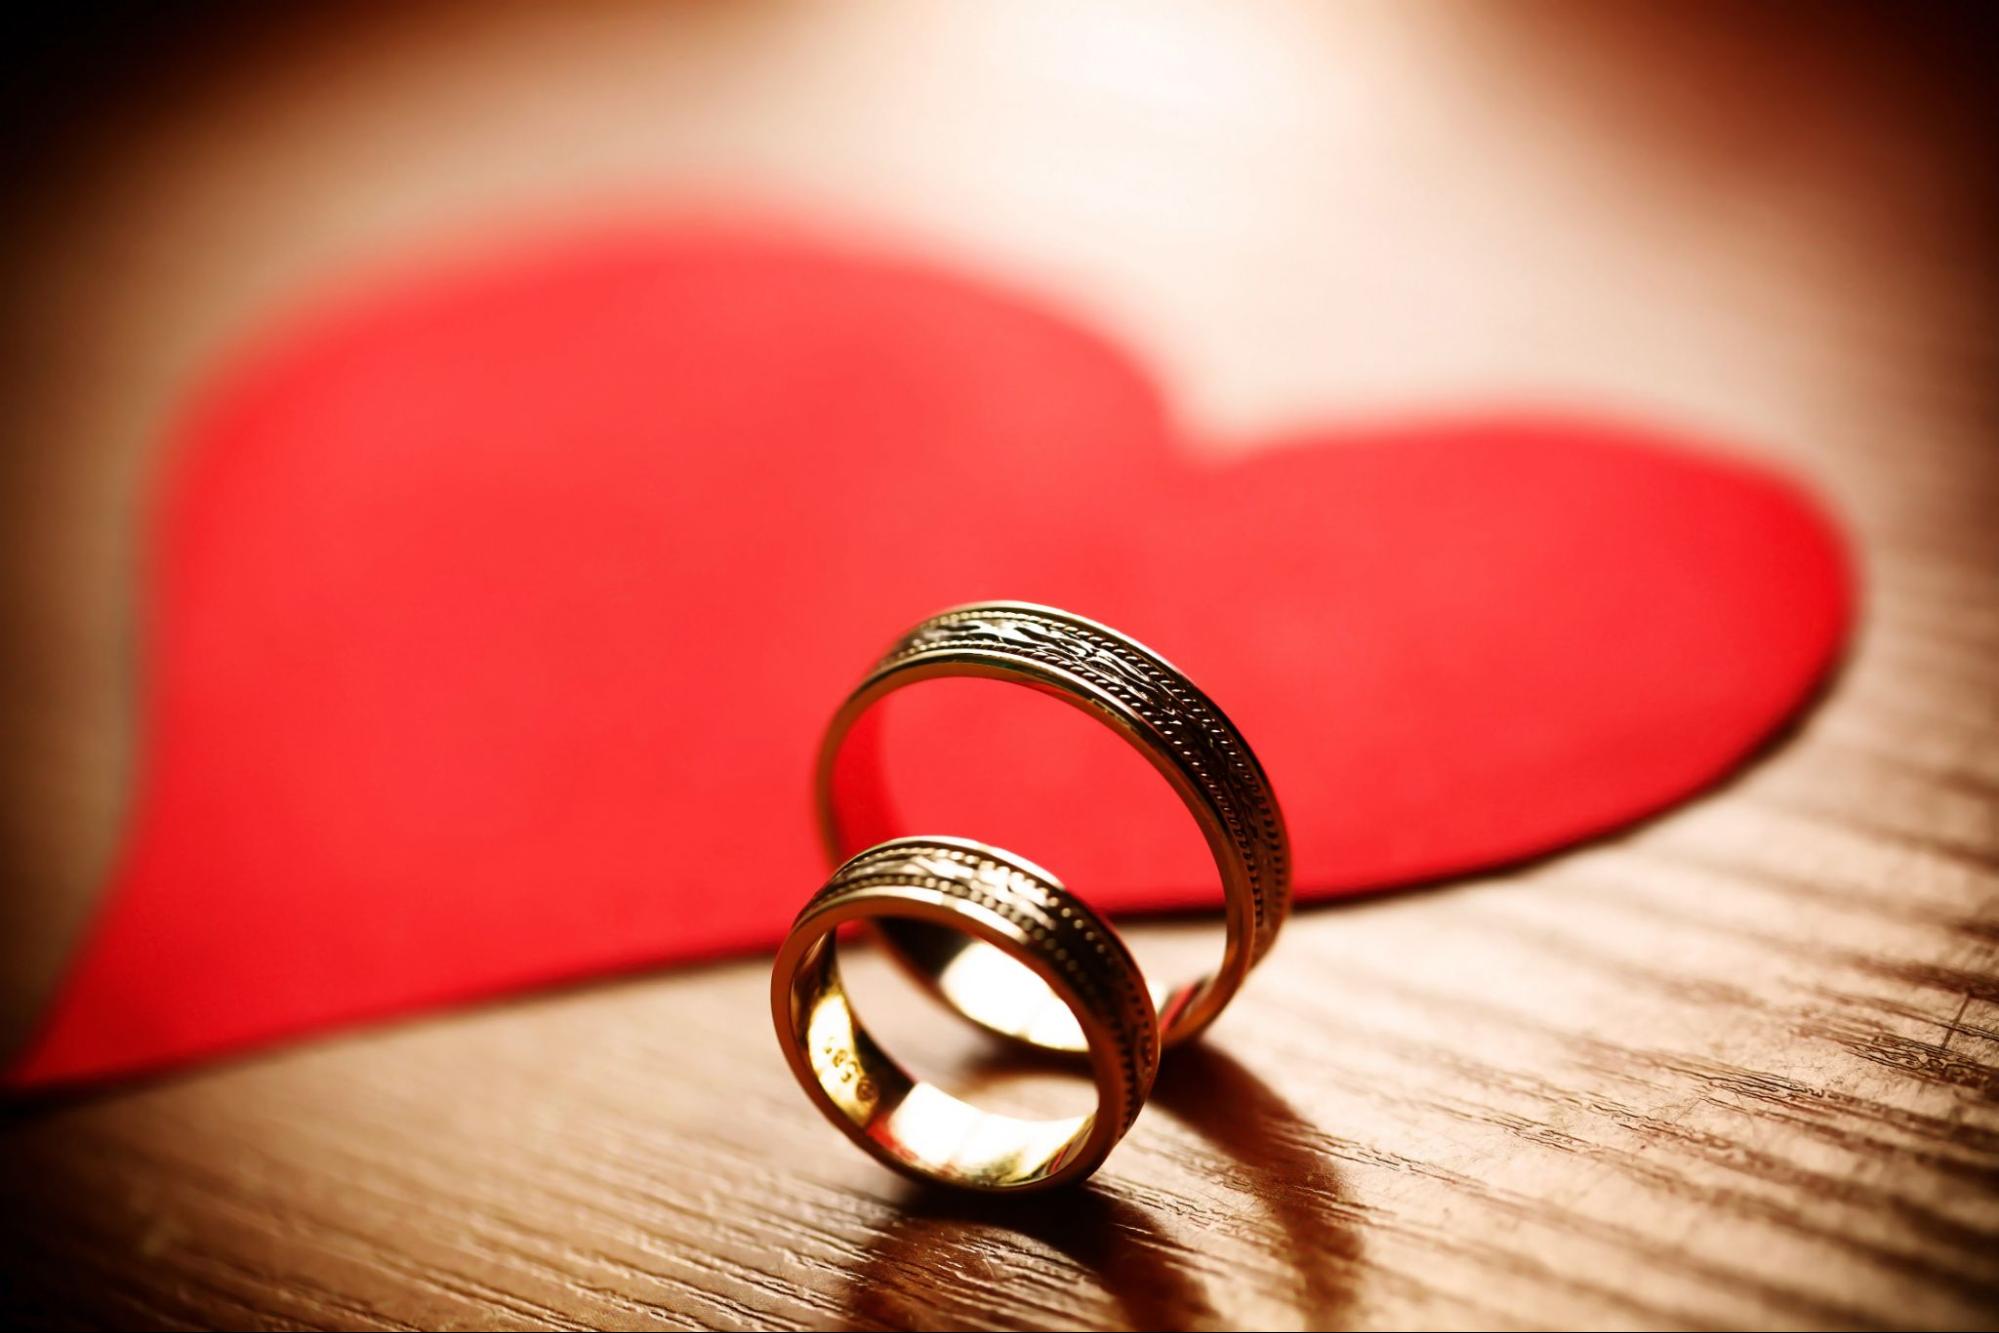 Two rustic vintage wedding bands sit on a dark wood table with a red heart in the background